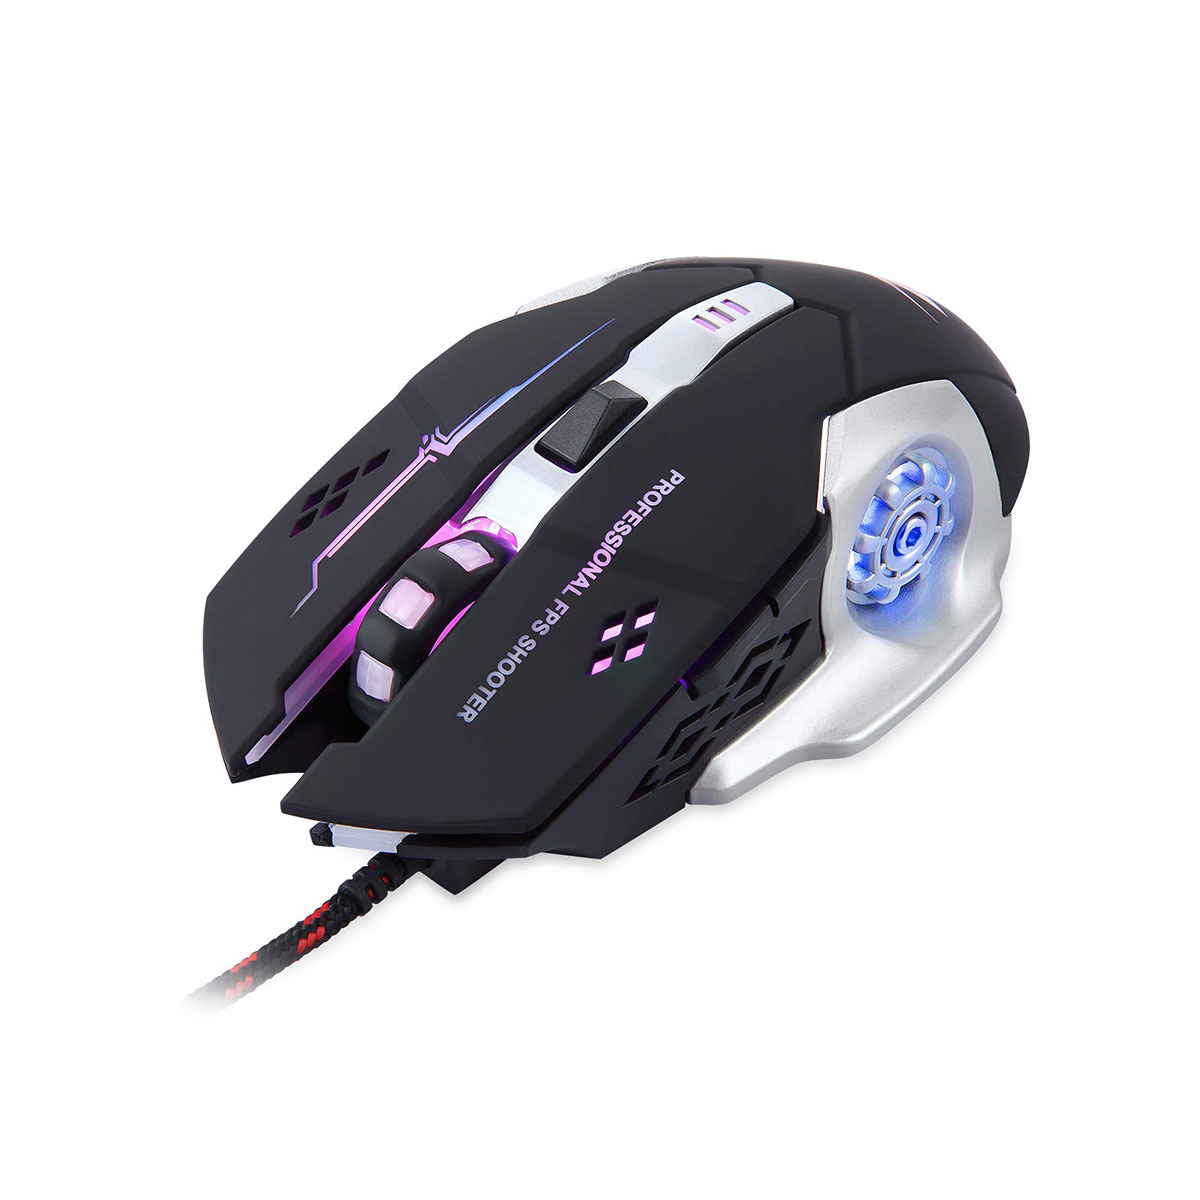 Zoook Bomber Gaming Mouse with 6 Programmable Buttons 3200 DPI Optical Sensor Ergonomic Mice Colorful LED Light for PC Computer Laptop (Wired)